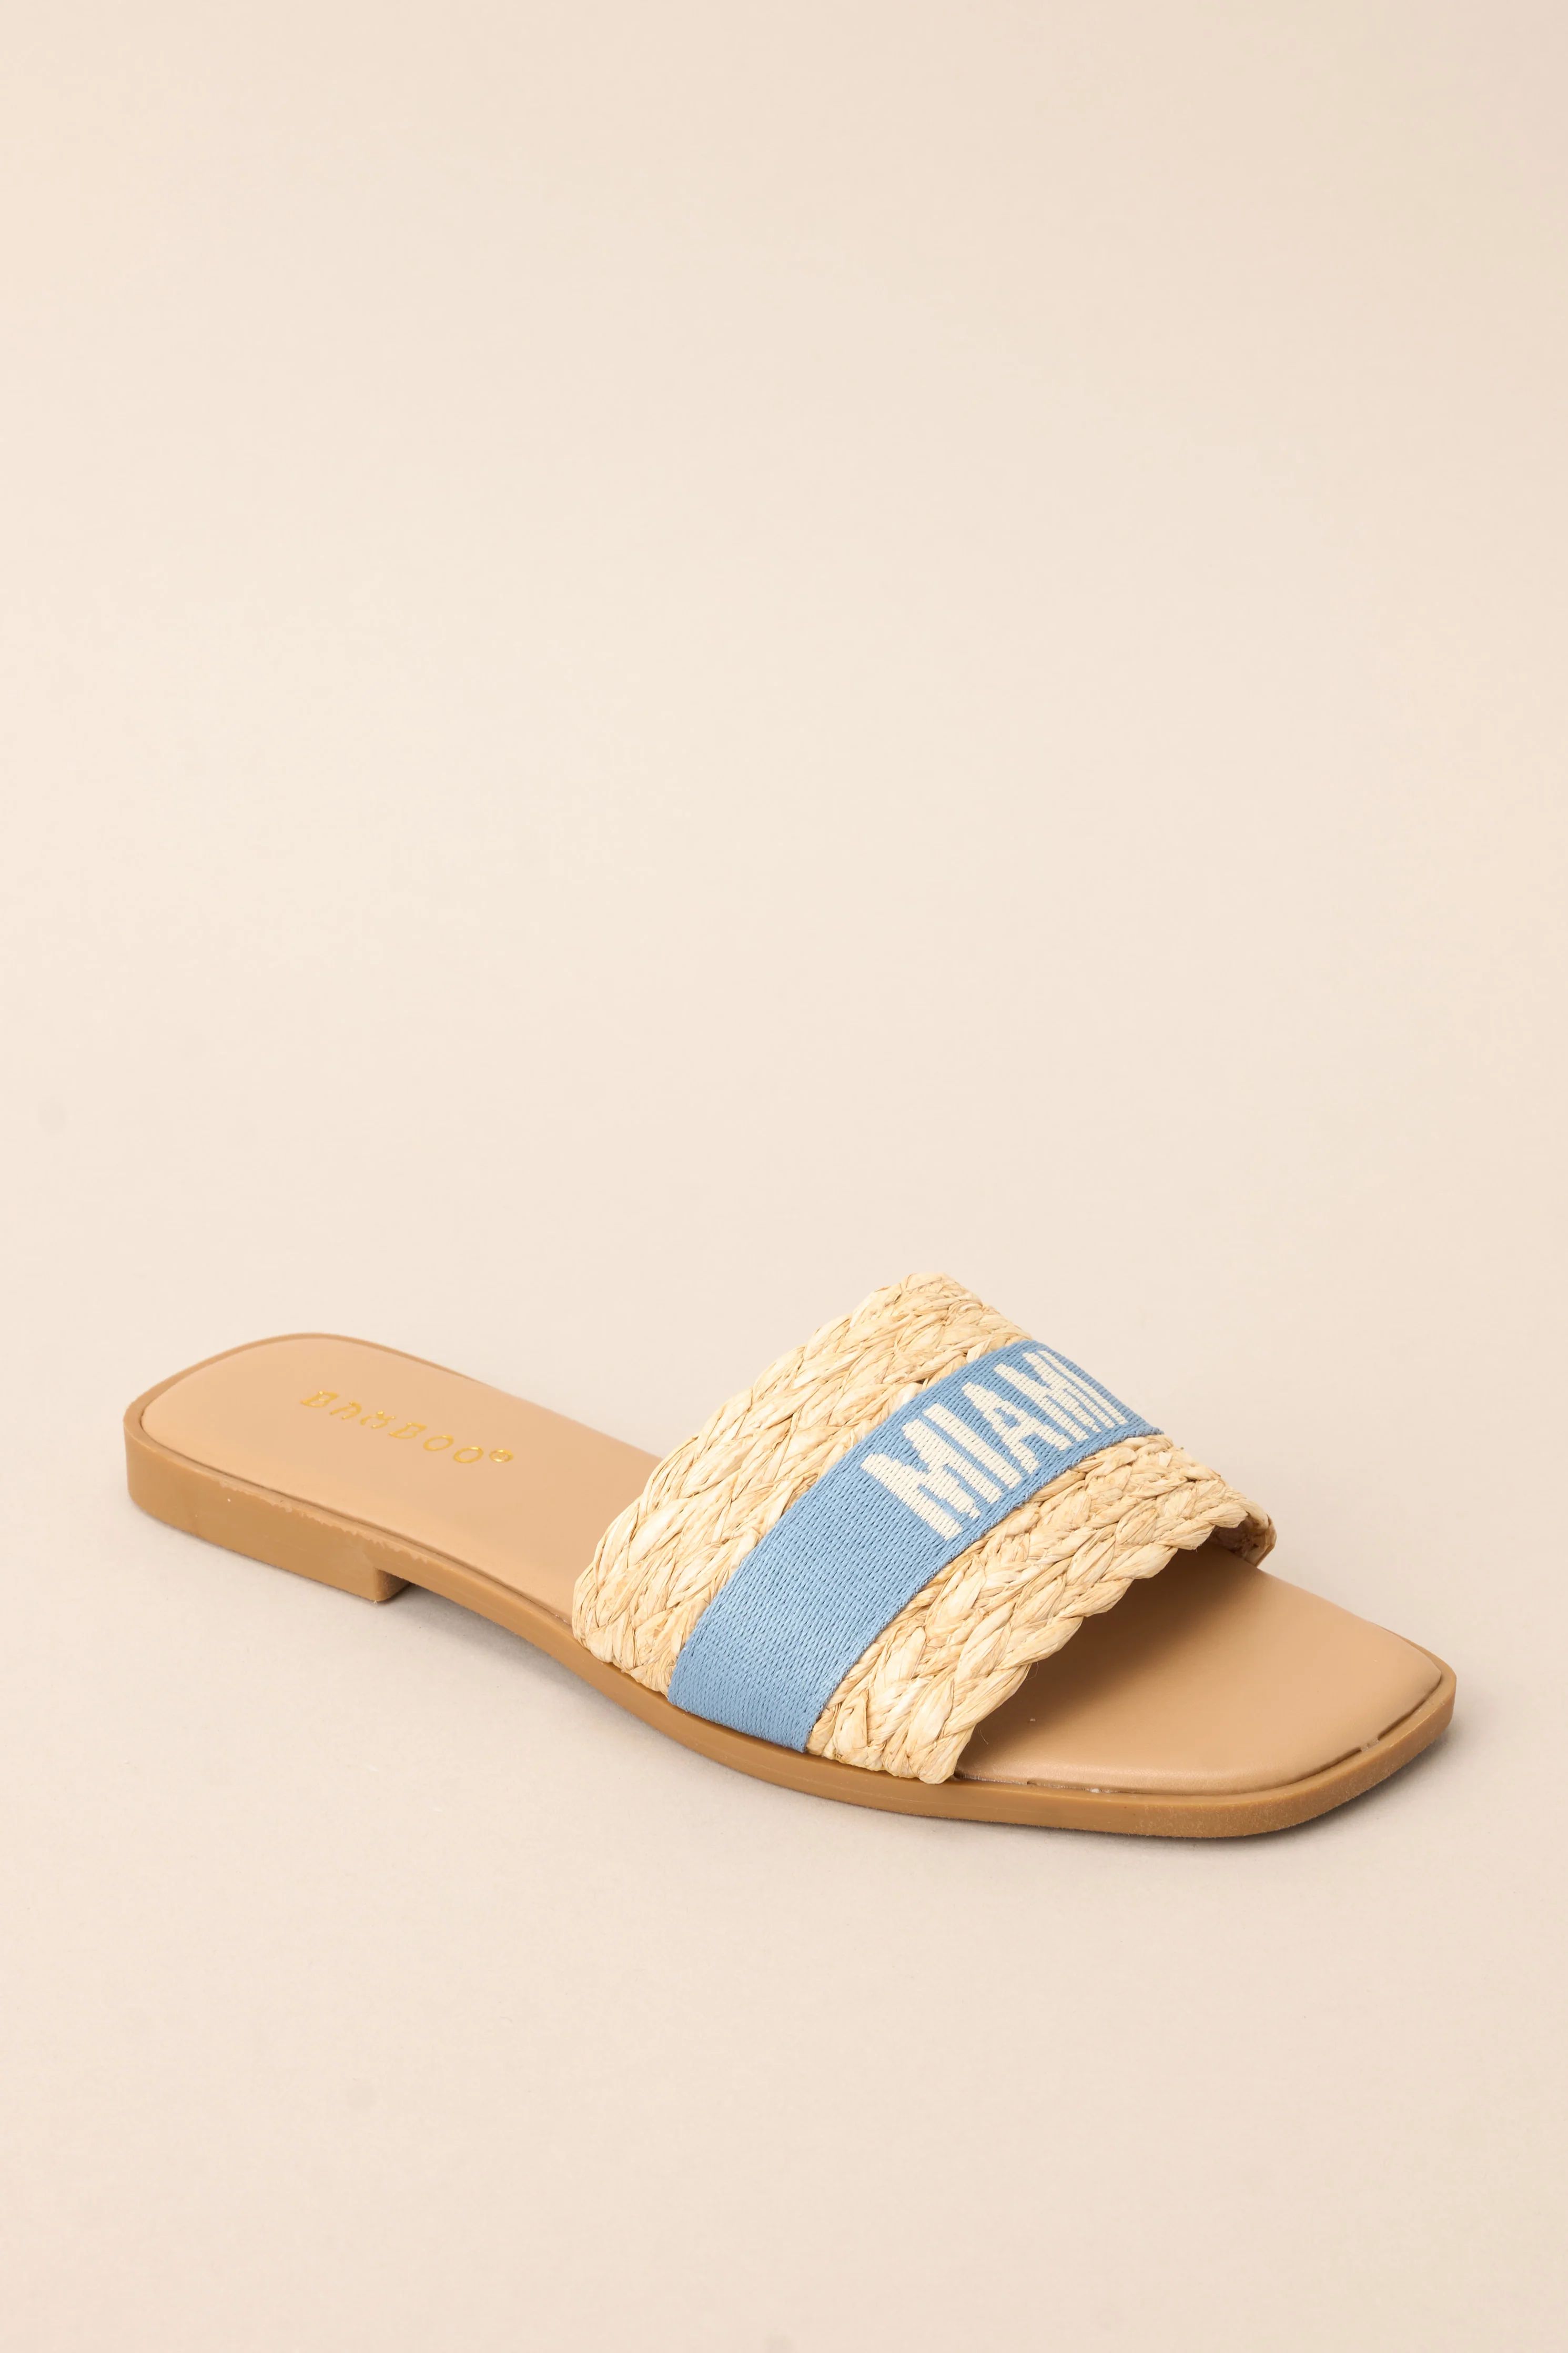 To The Tropics Sky Blue Sandals | Red Dress